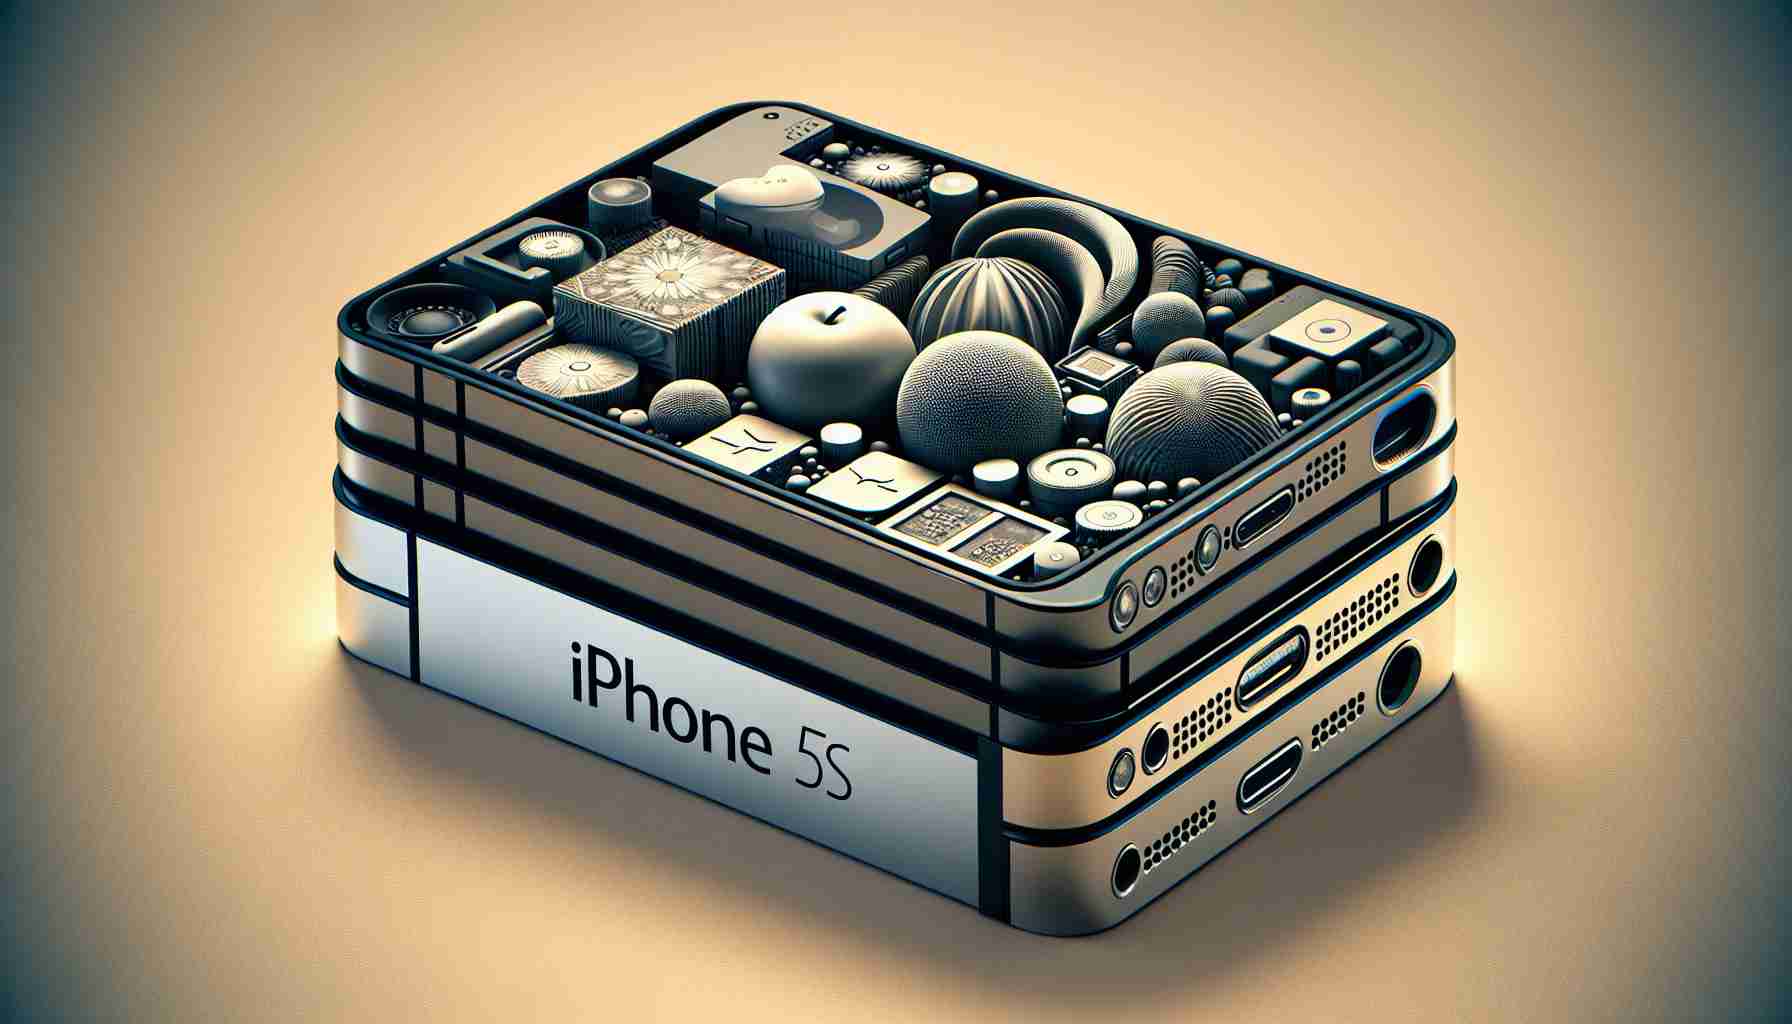 Apple’s Vintage Tech: iPhone 5s Joins Obsolete Lineup